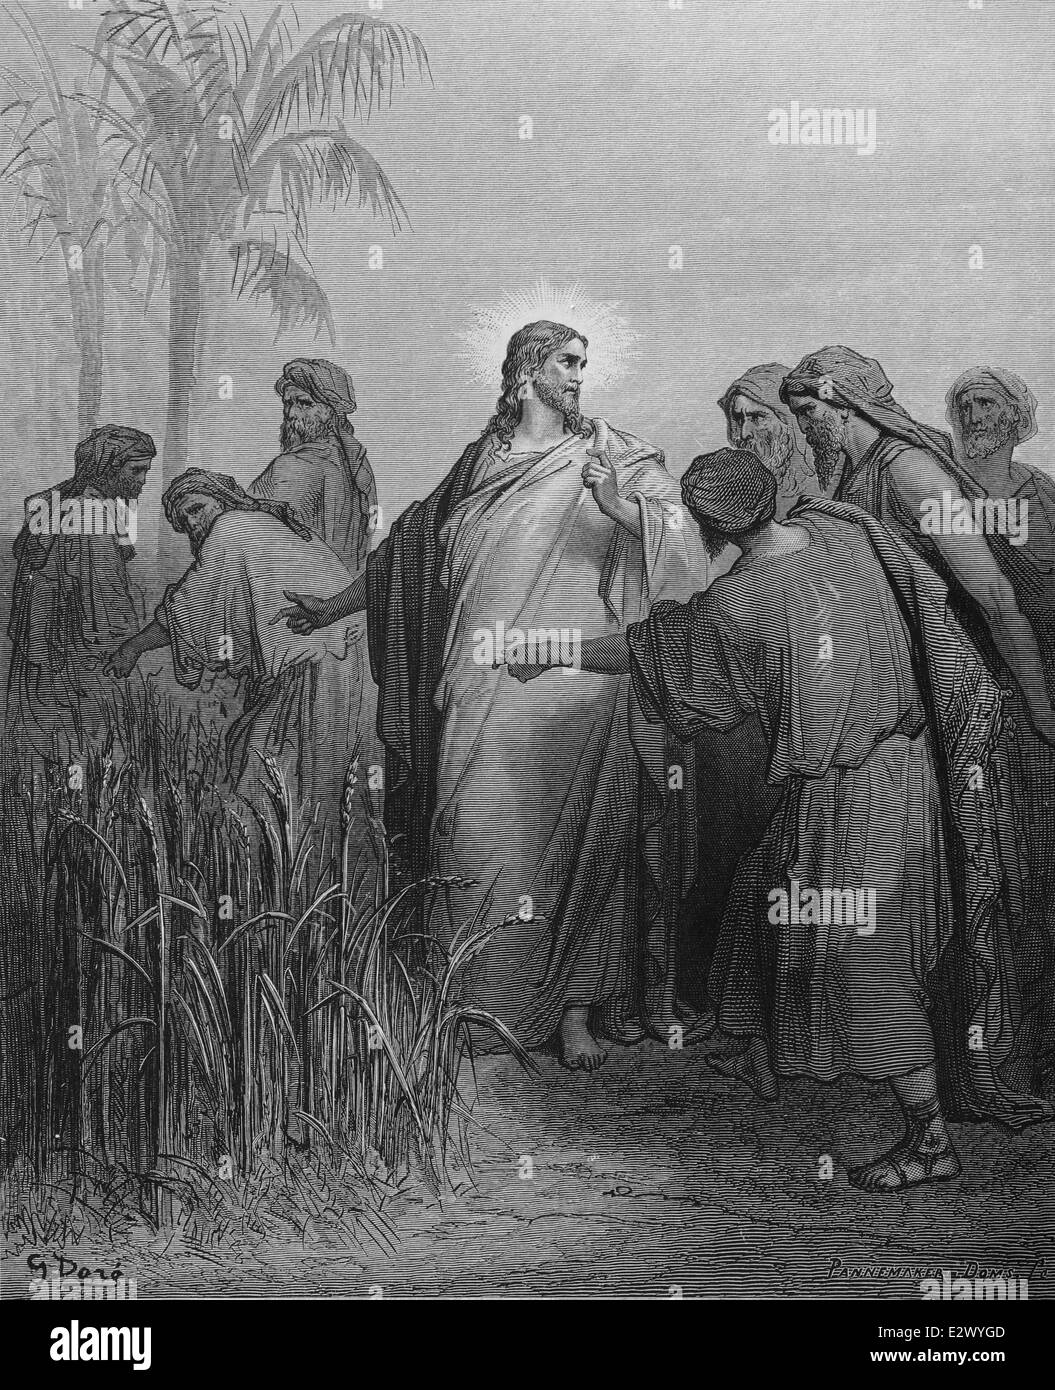 The Pharisees challenge Jesus over allowing his disciples to pick grain on the SabbathT (Mark, 2:27). Drawing by Gustave Dore. Stock Photo